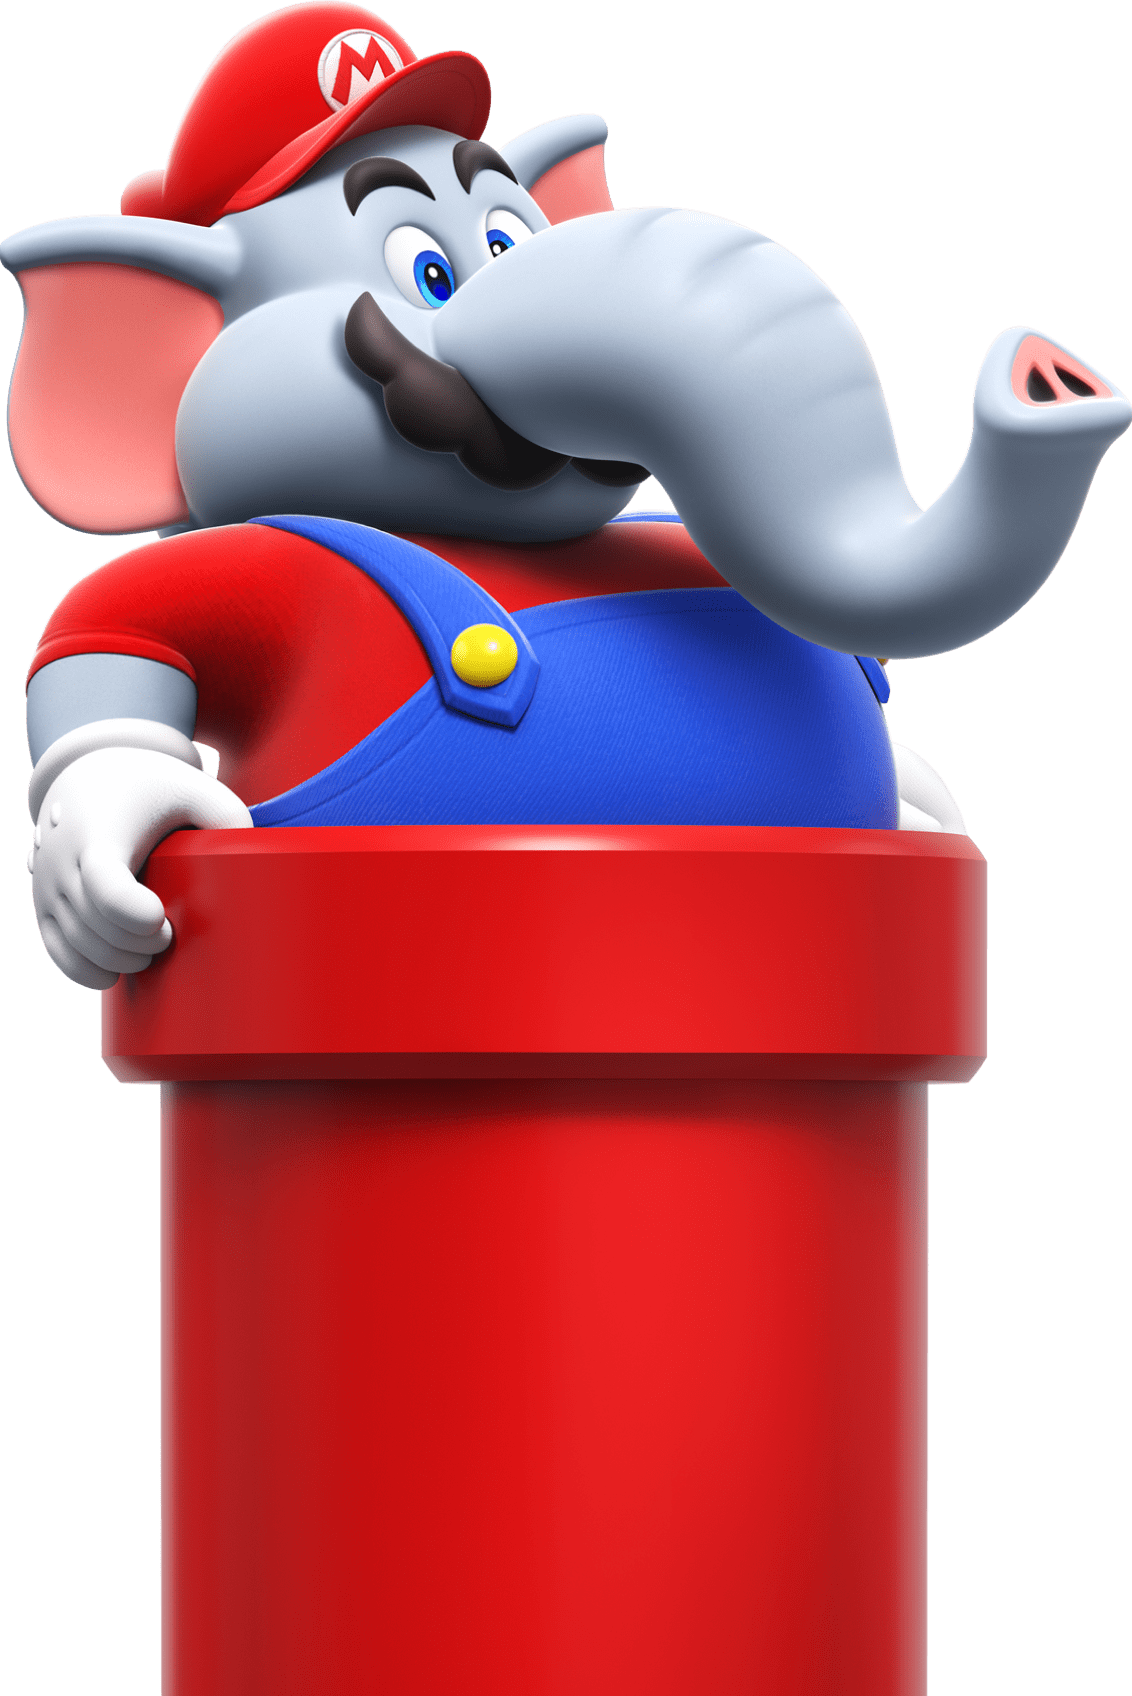 Mario, in Elephant form, jumps up and activates a Wonder Flower, causing everything to change shape and form.